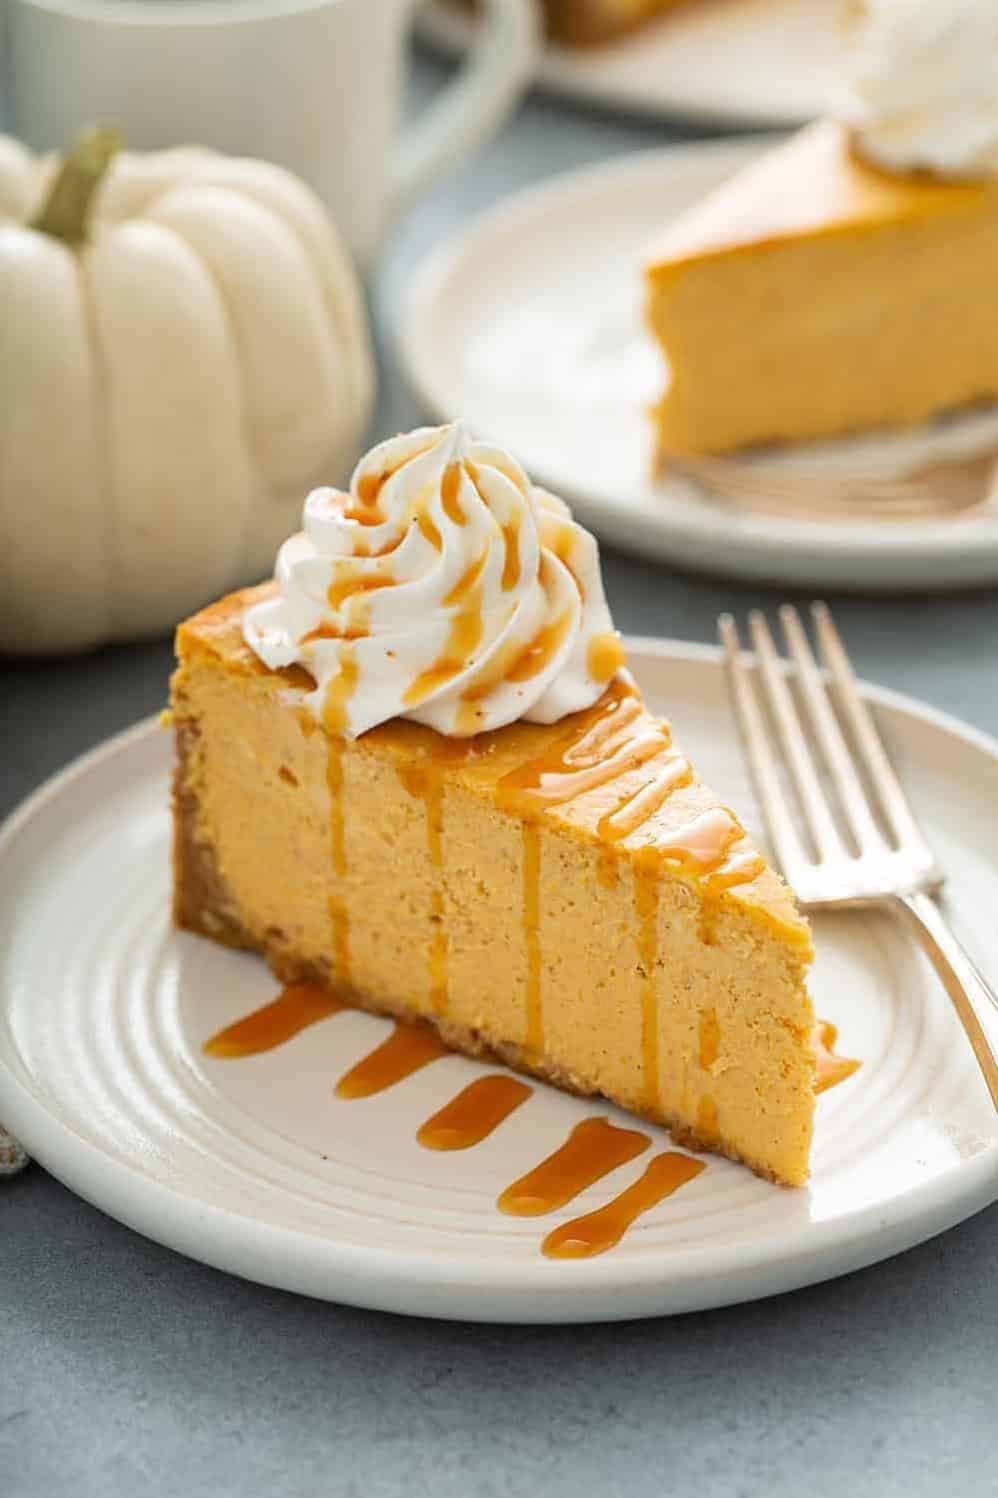  Swirls of spiced pumpkin puree throughout the cheesecake add a beautiful pop of autumn color.